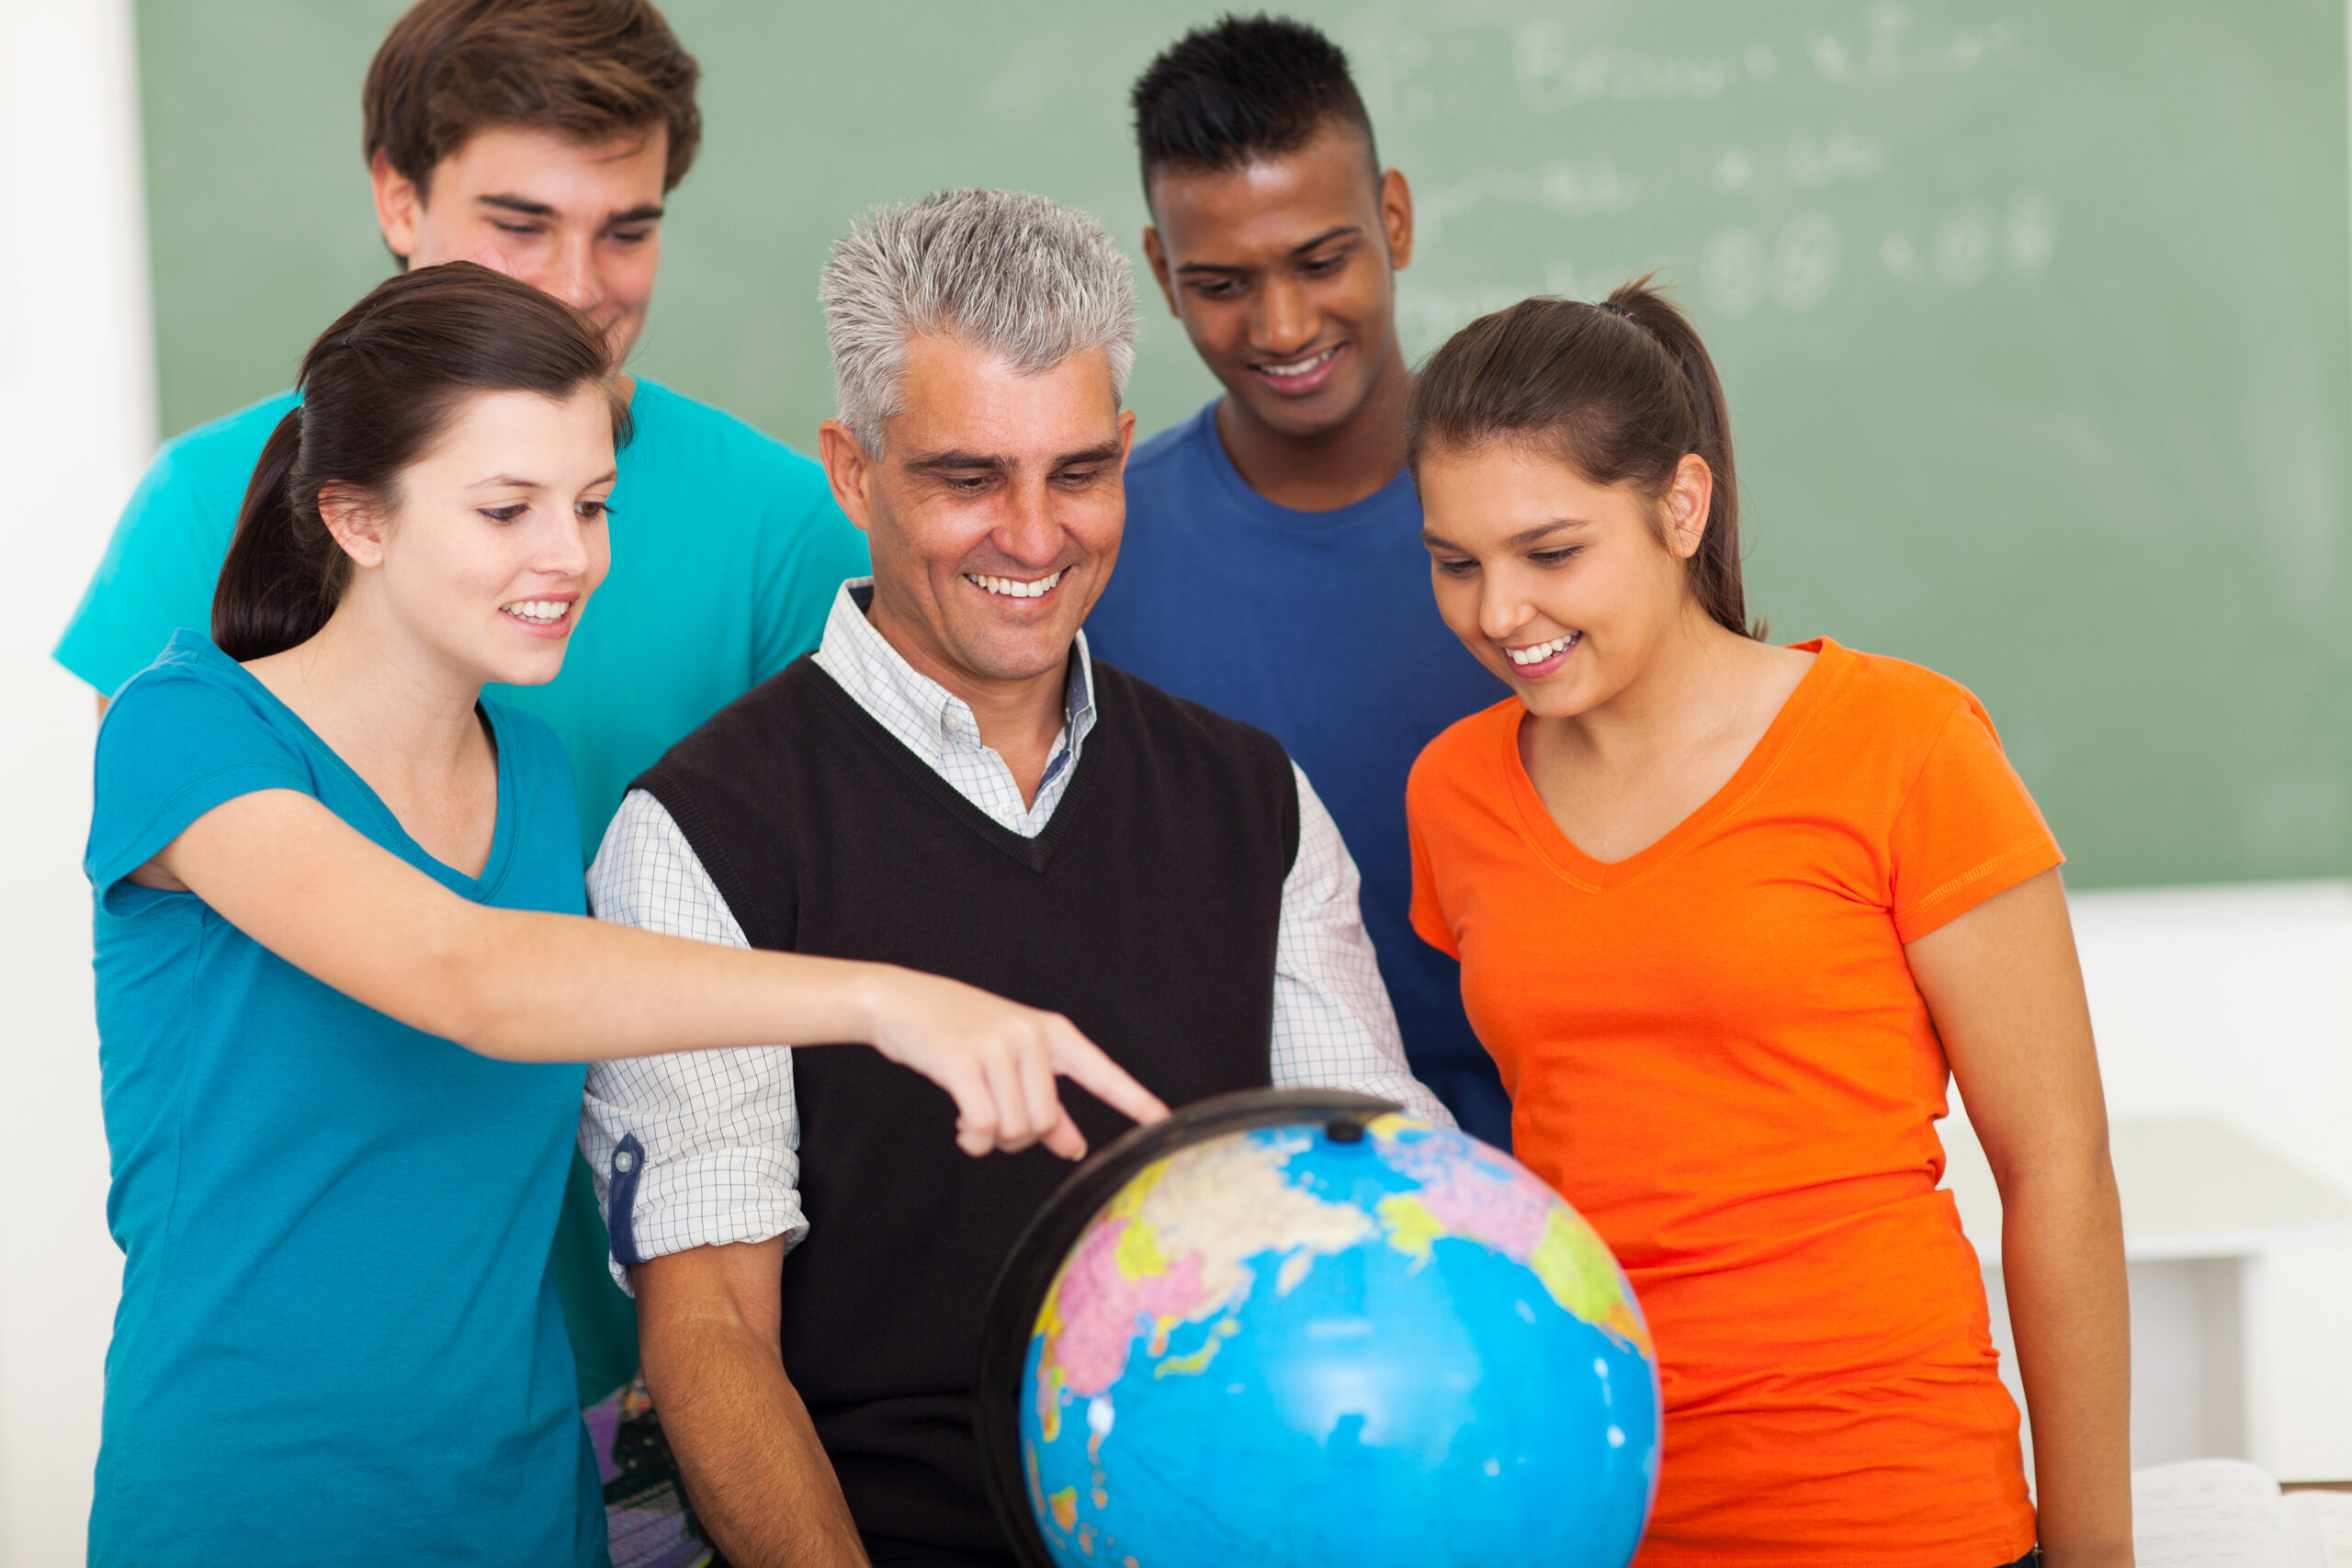 group of happy high school students and teacher looking at globe